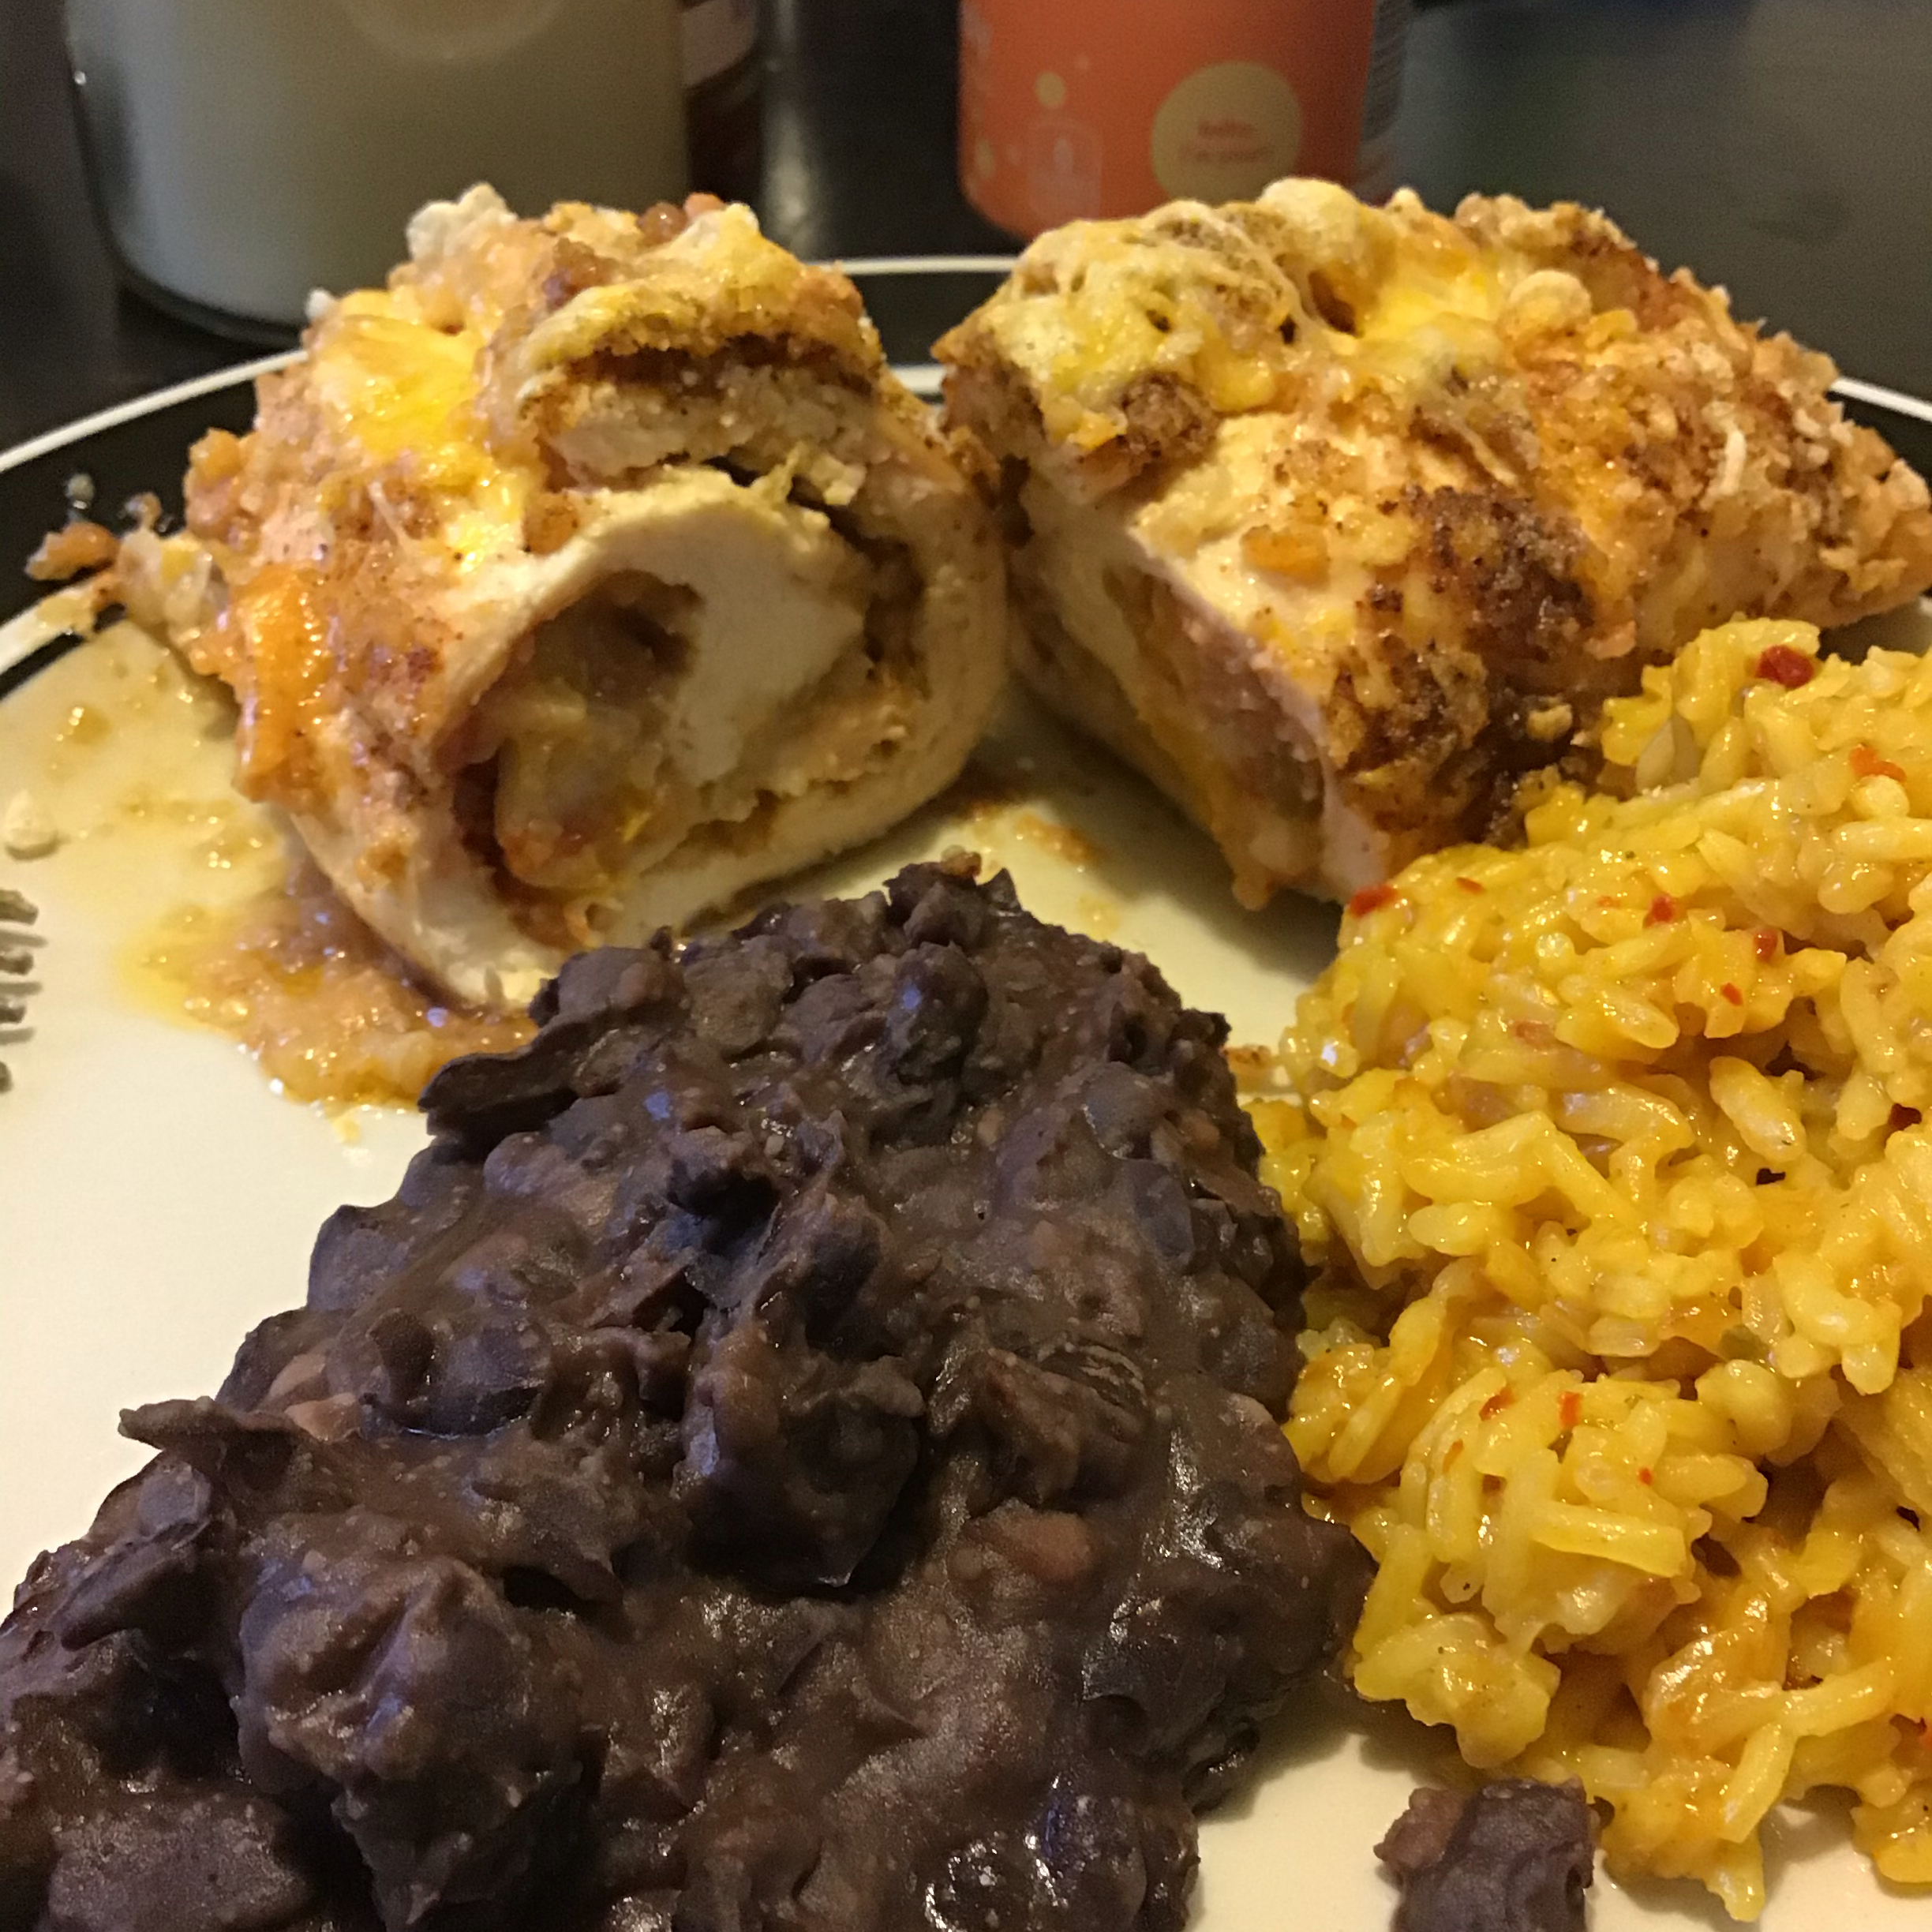 Bob's Mexican Stuffed Chicken cocokween